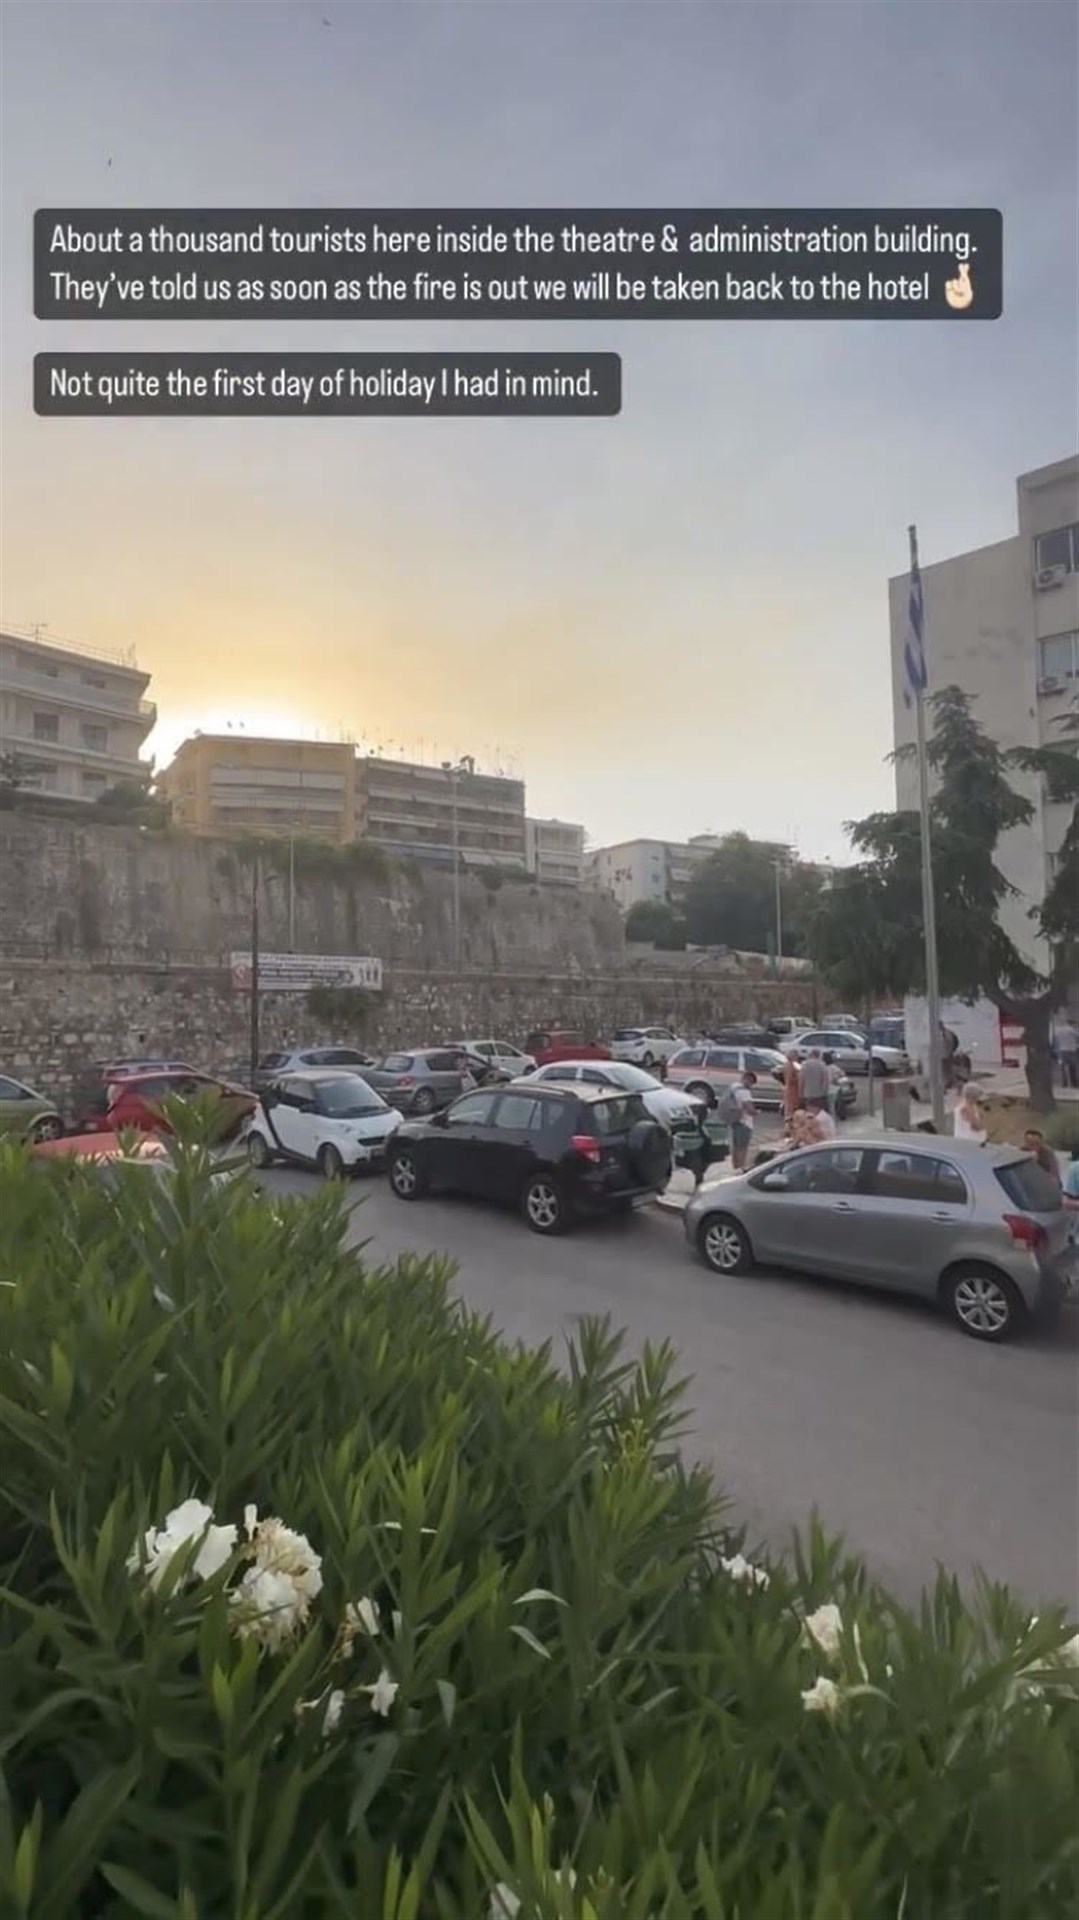 Scenes from the Corfu theatre where evacuated visitors and residents congregated. Instagram post by Adele Buyze.